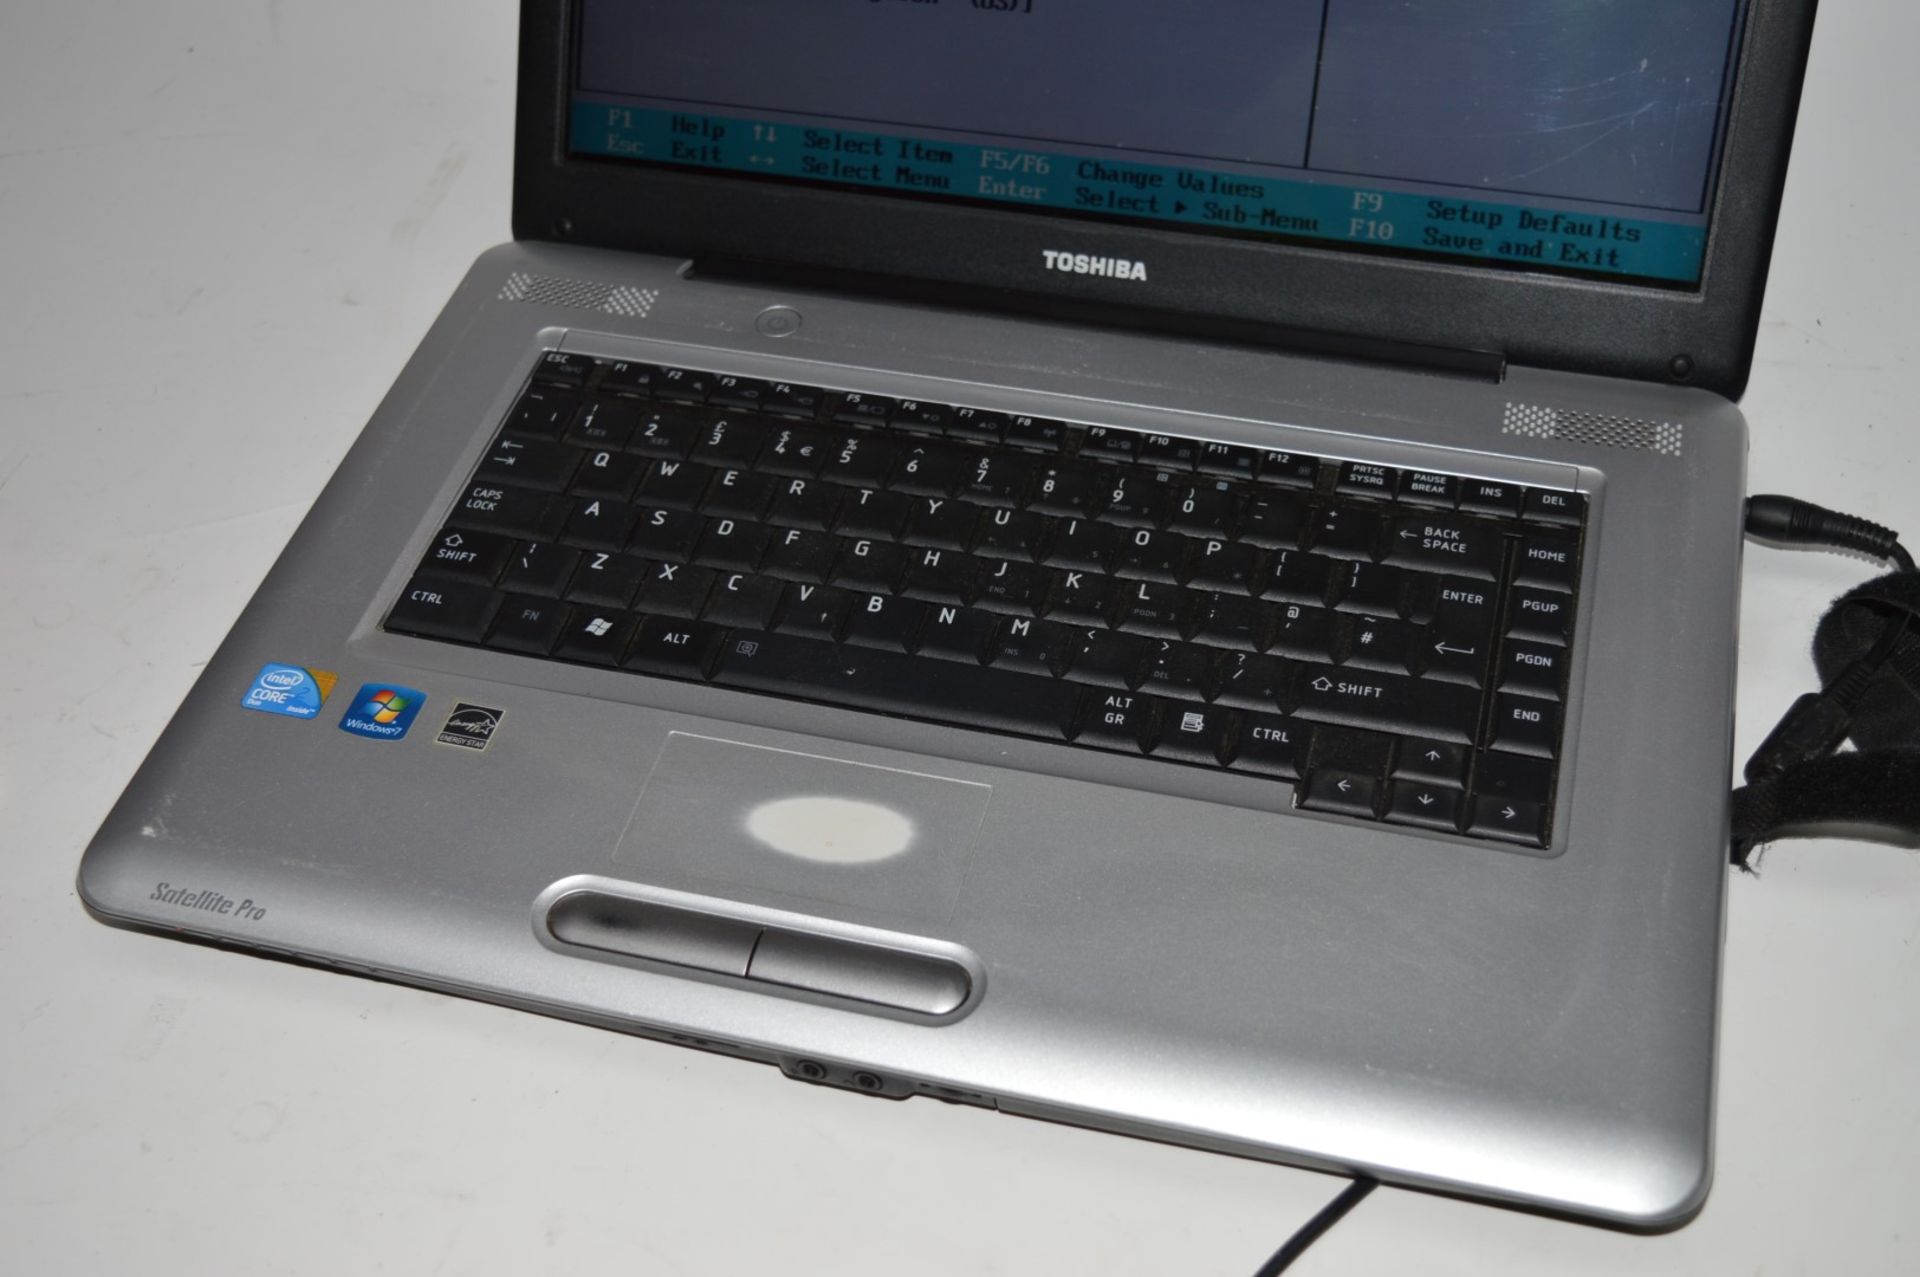 1 x Toshiba 15.4 Inch Laptop Computer - Intel Core 2 Duo T6570 Processor and 2gb Ram - Tested to - Image 2 of 7